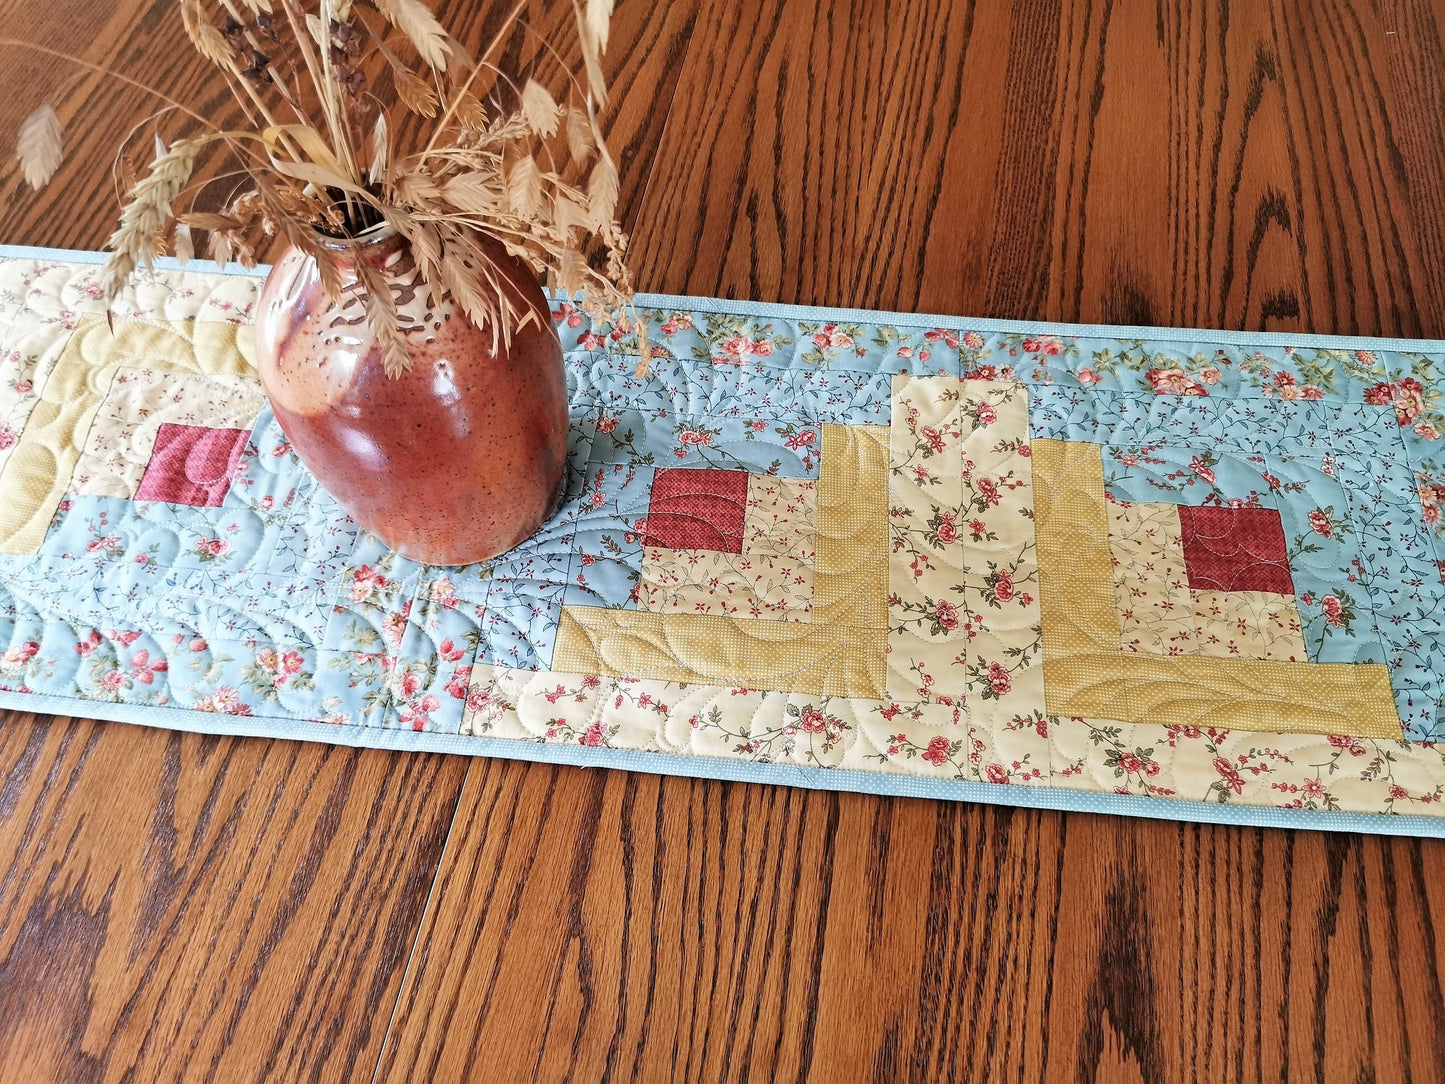 Quilted Log Cabin Table Runner, Rose Floral Decor, Teal and Golden Yellow Summer Colors